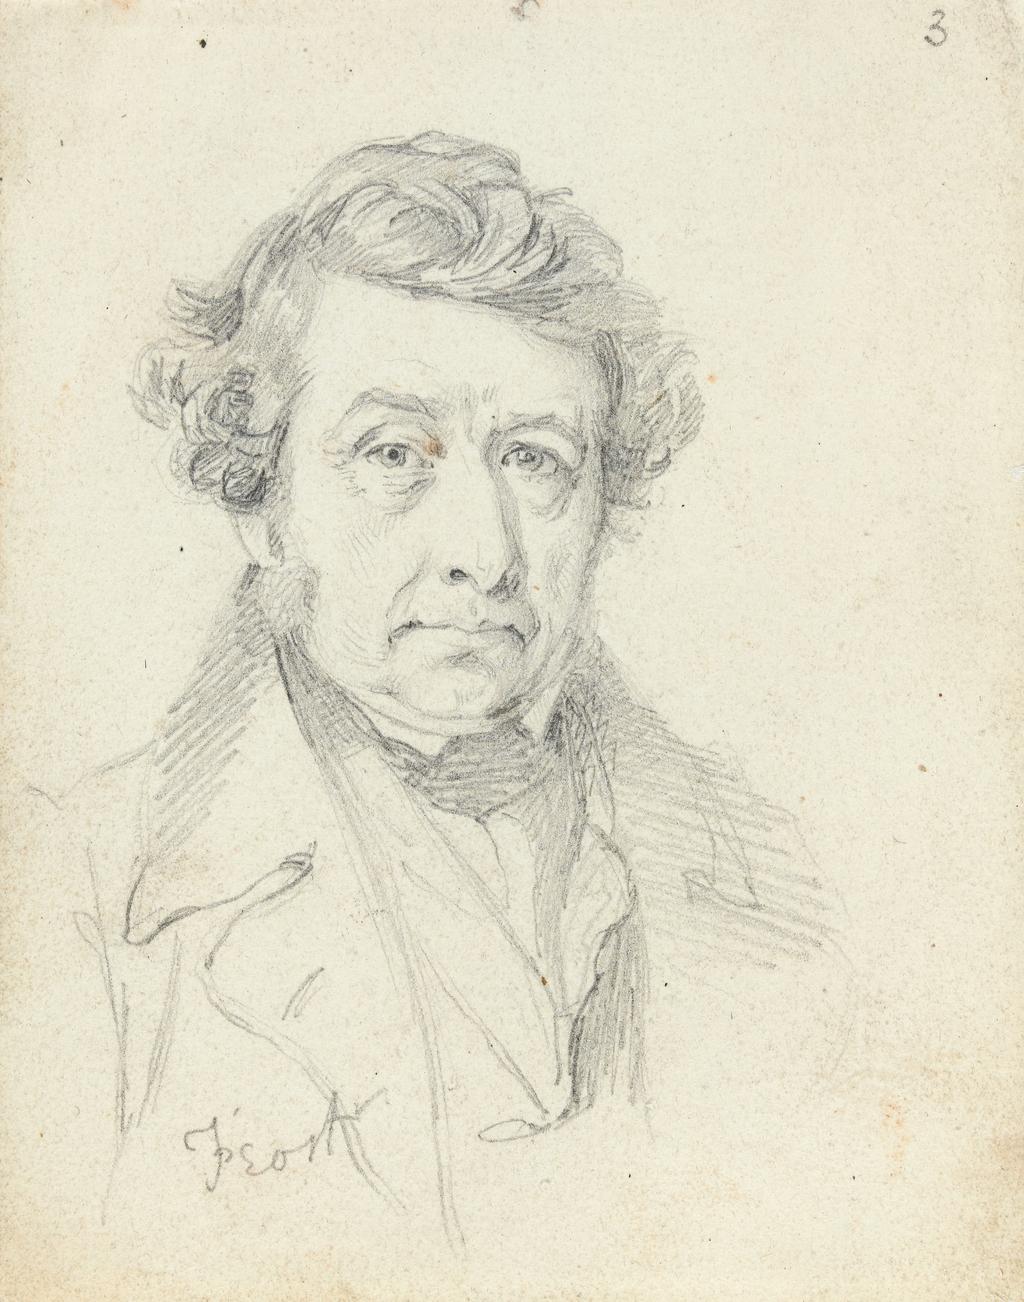 An image of William Wolfe Alais (British, active c.1829-1833). Sketch of Chartist Prisoner taken in court; Frost. Graphite on paper. Circa 1830s.